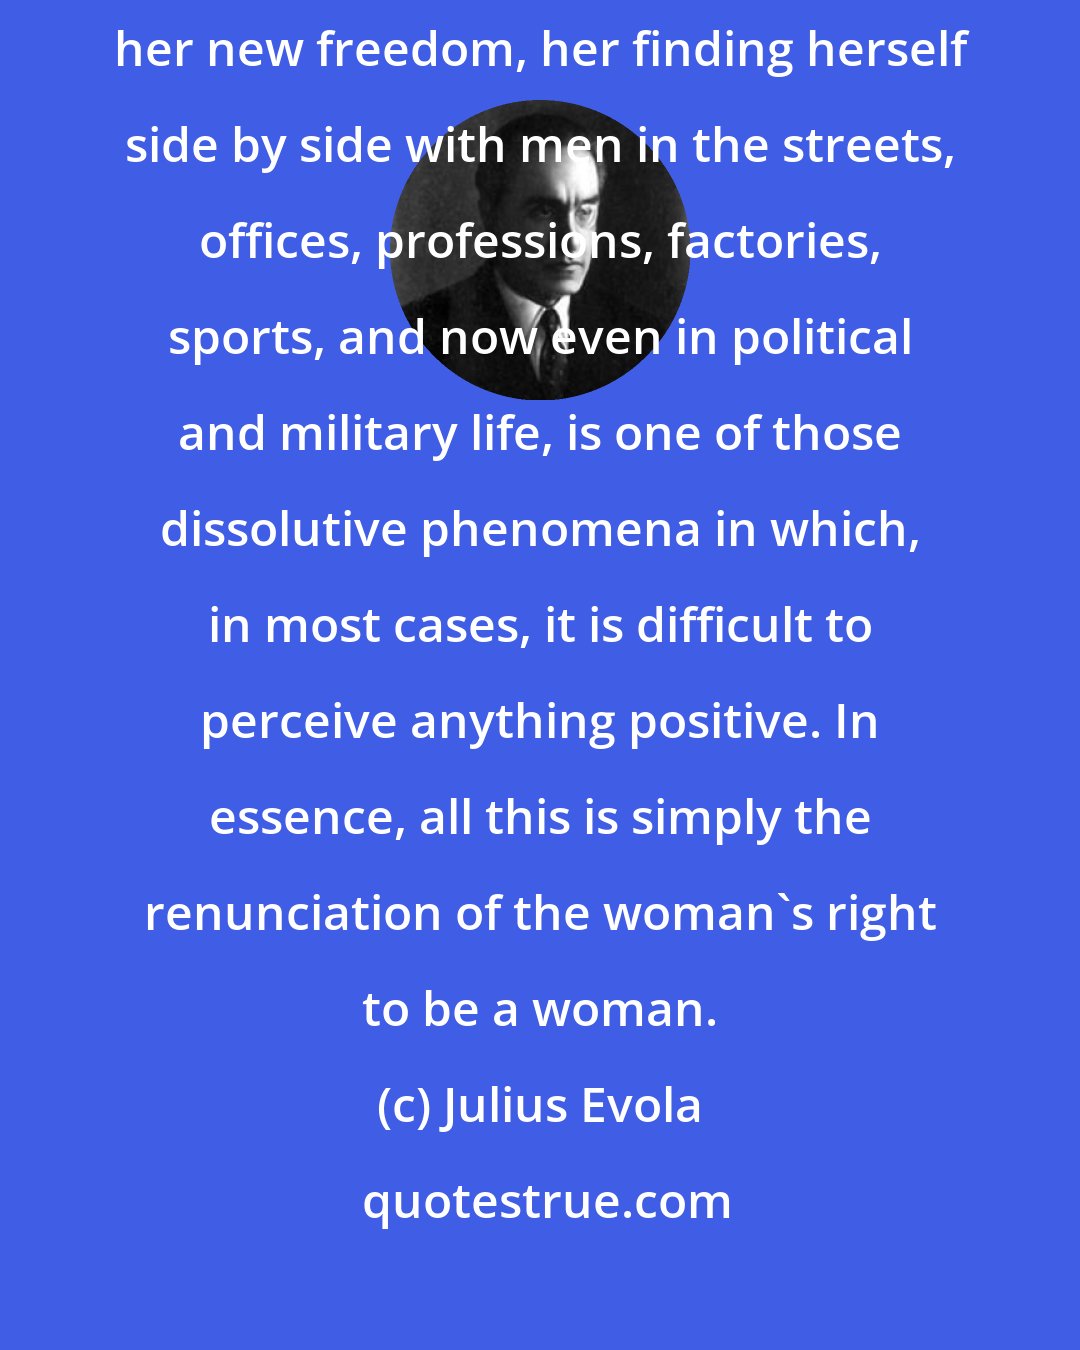 Julius Evola: The entrance of the woman with equal rights into practical modern life, her new freedom, her finding herself side by side with men in the streets, offices, professions, factories, sports, and now even in political and military life, is one of those dissolutive phenomena in which, in most cases, it is difficult to perceive anything positive. In essence, all this is simply the renunciation of the woman's right to be a woman.